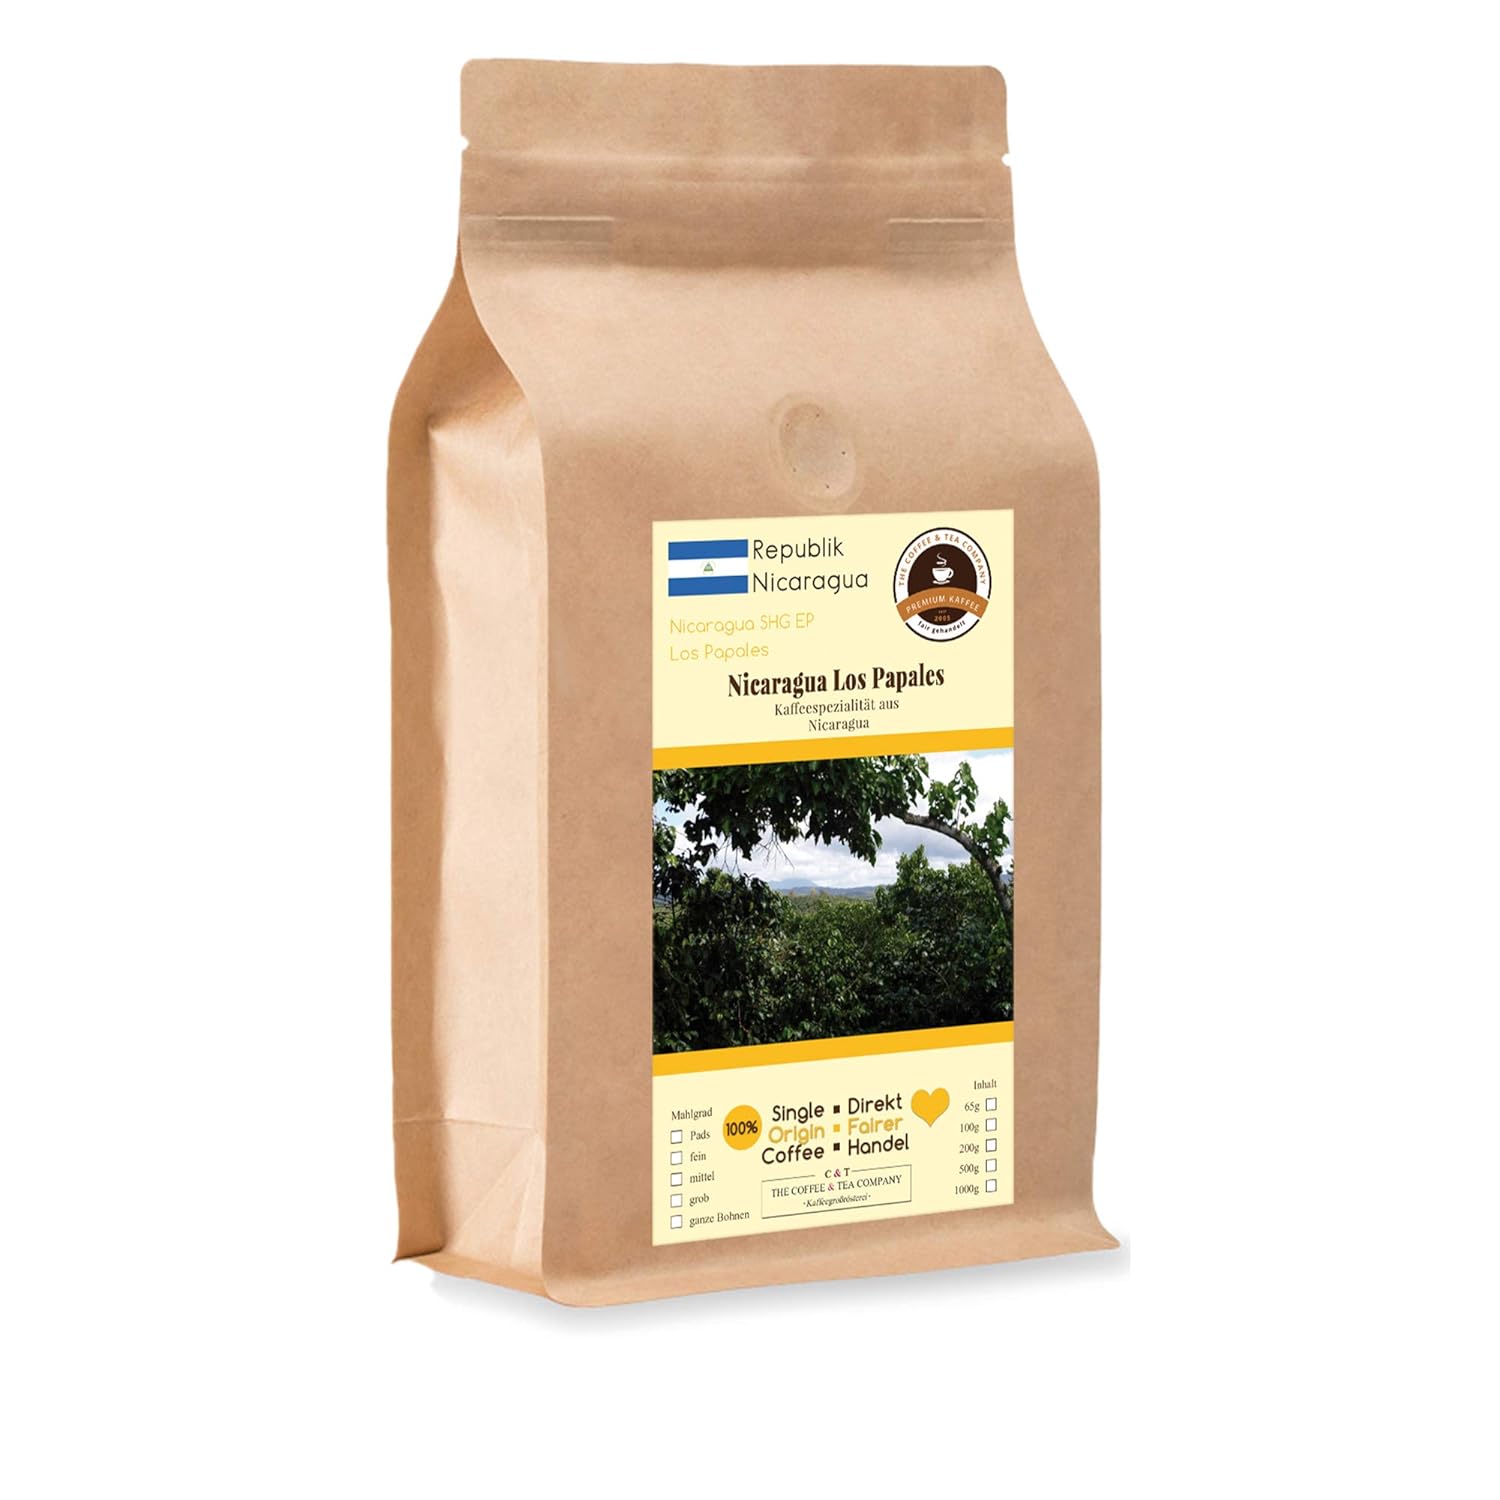 Coffee Globetrotter - Coffee With Heart - Nicaragua Los Papales - 1000 g Finely Ground - for Espresso Maker, Espresso Machine - Top Coffee Fair Trade Supports Social Projects